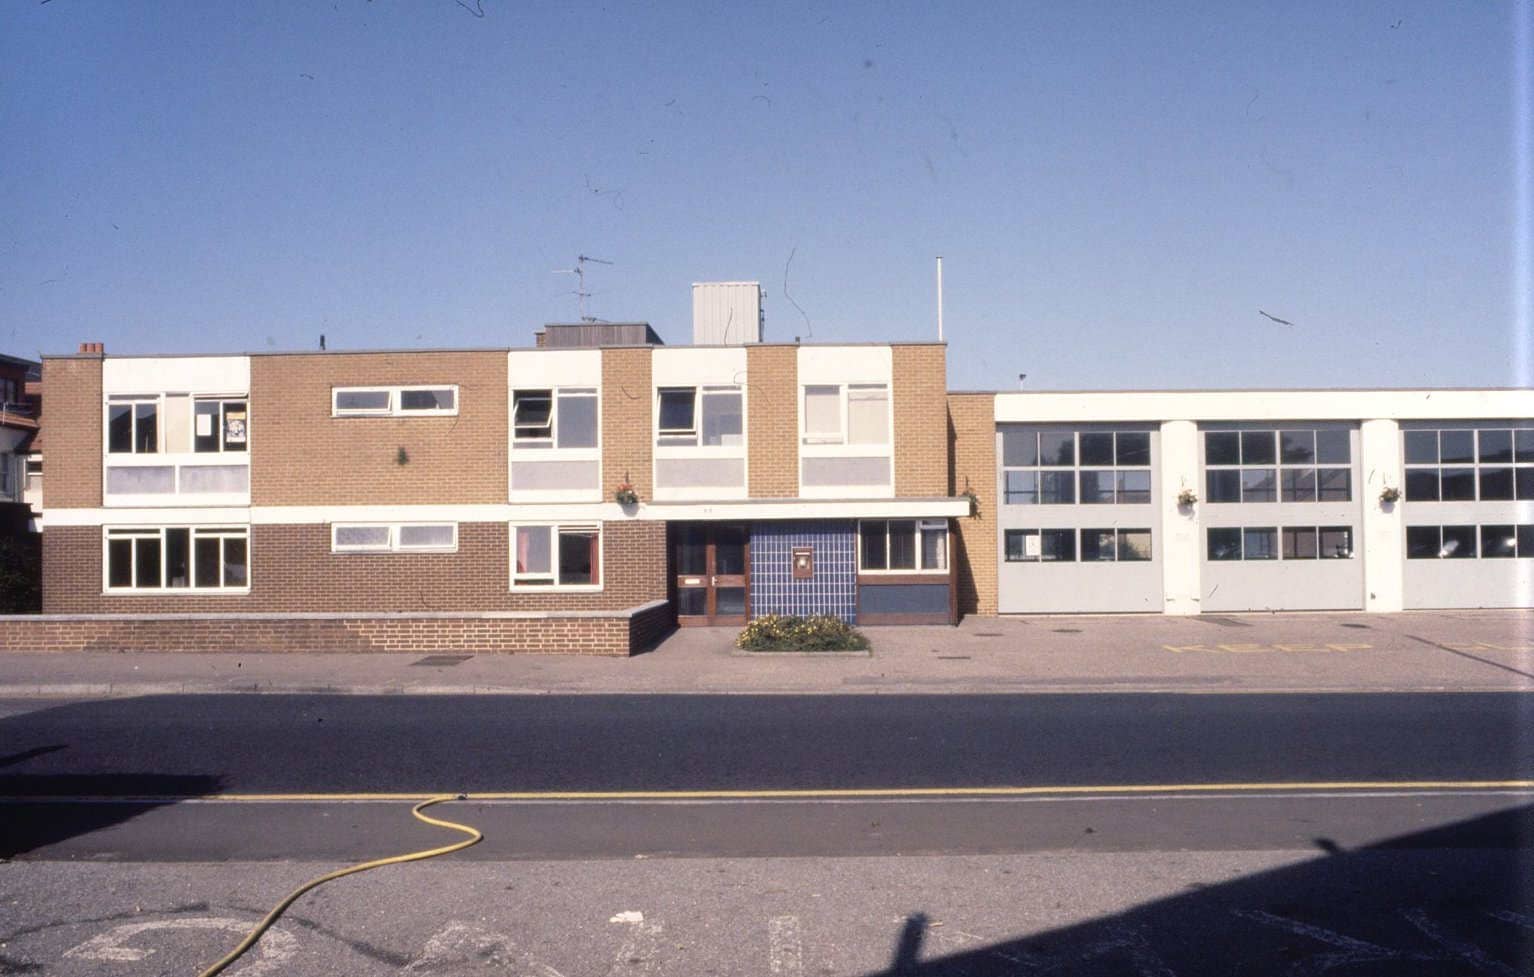 Colour photo of a beige brick two storey rectangle building which was Pokesdown Fire Station.